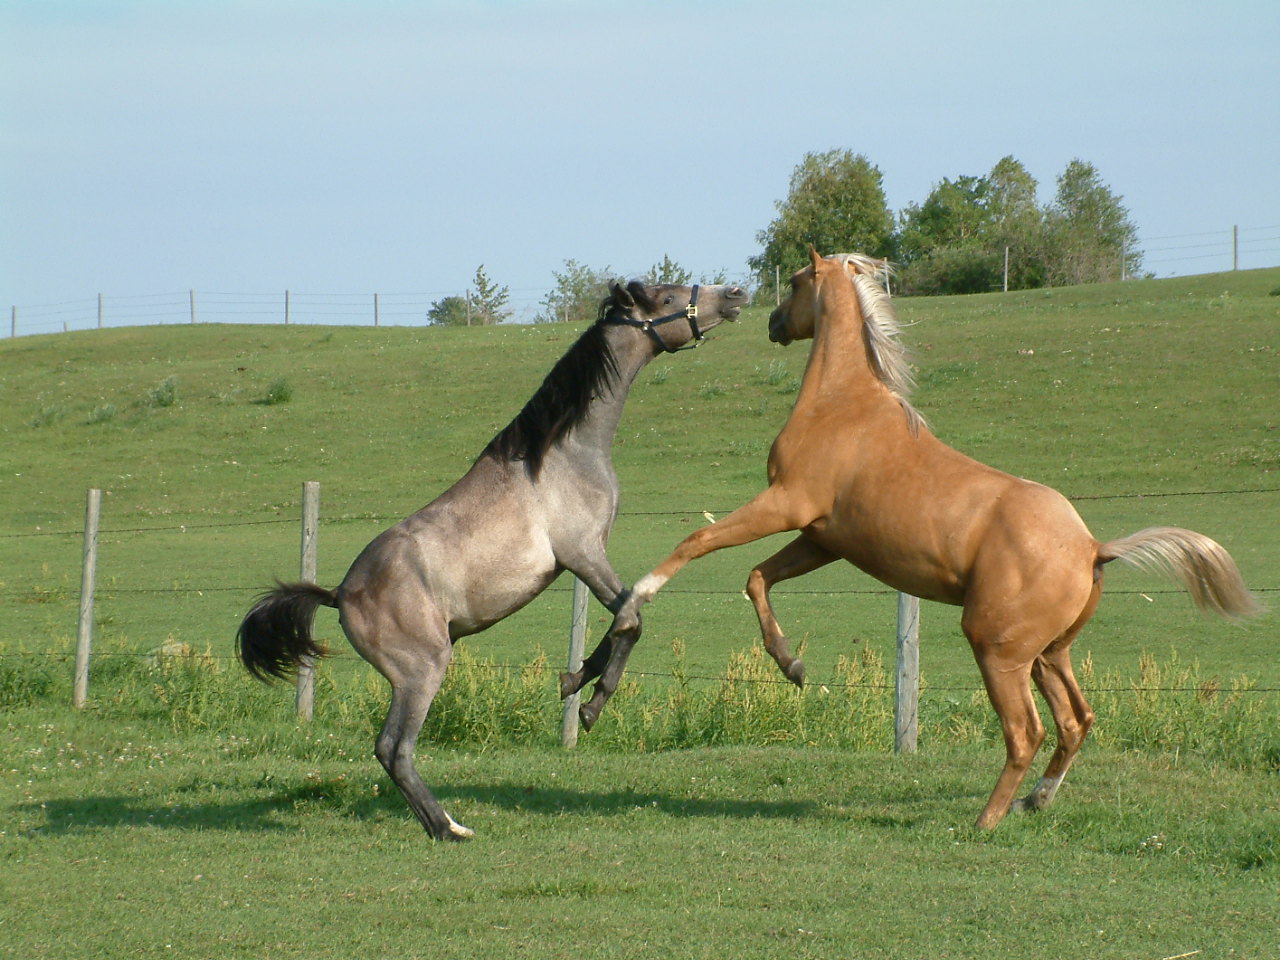 Frolicking colts!